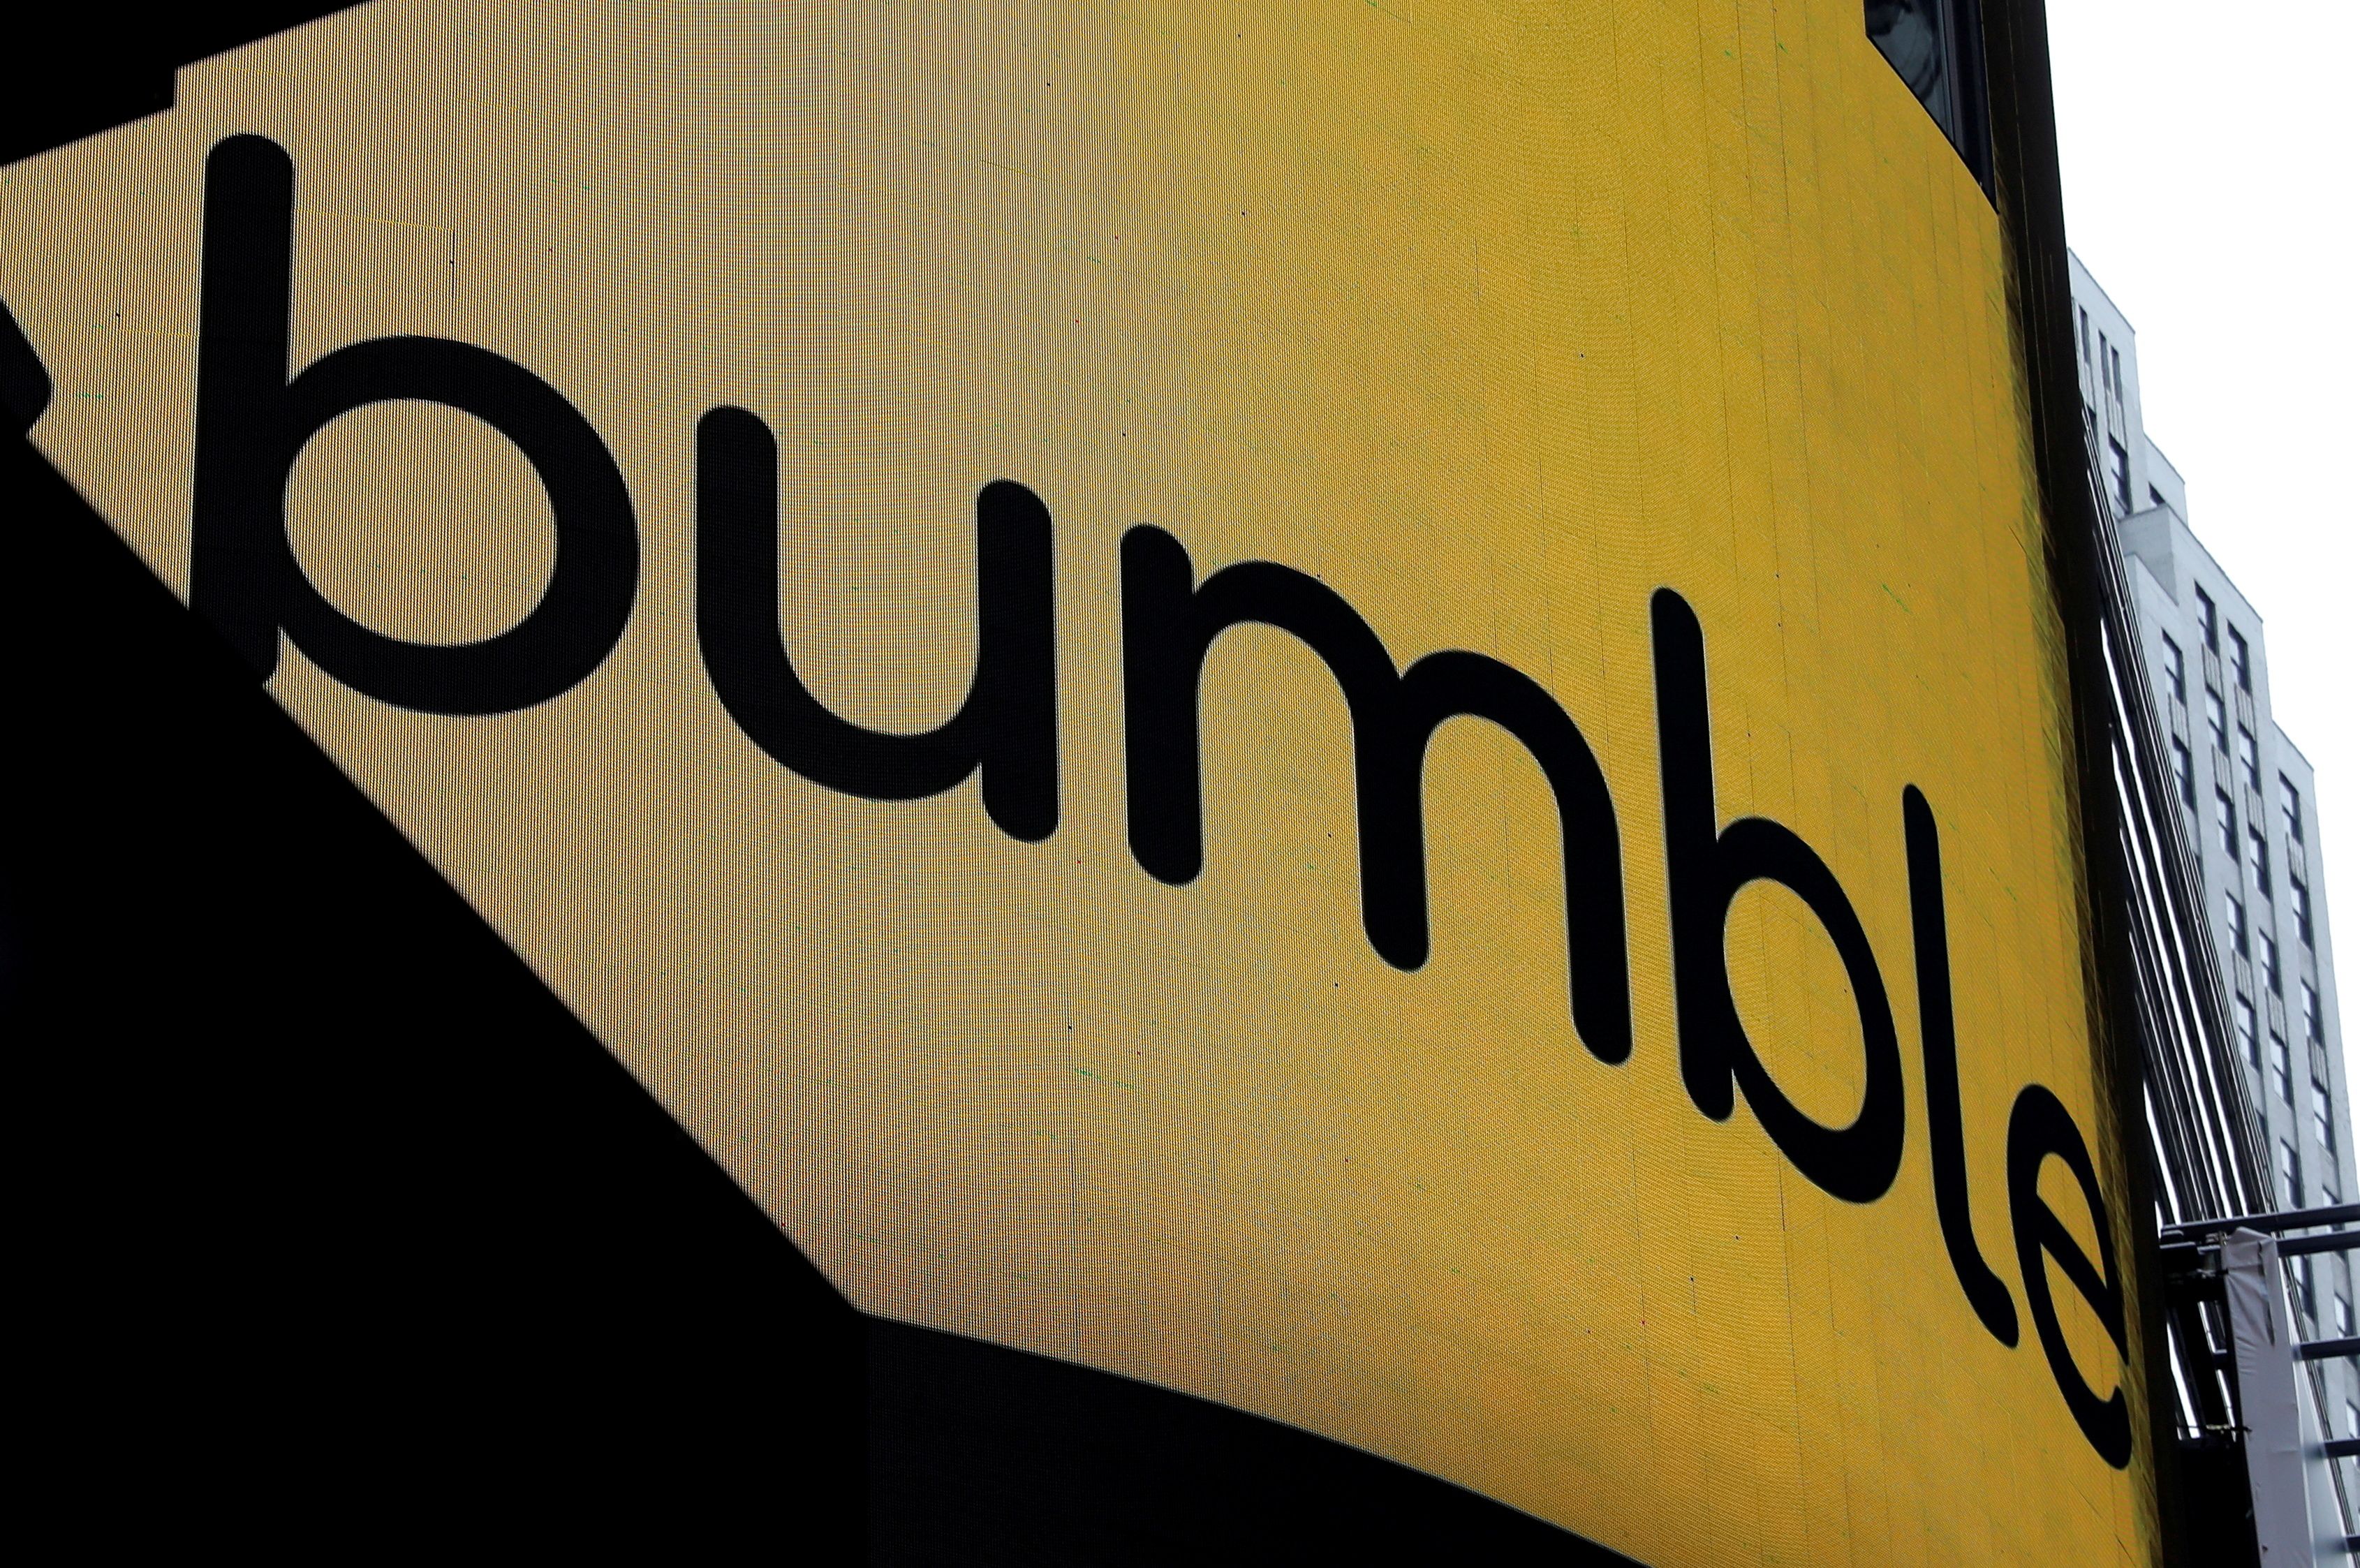 The display outside the Nasdaq MarketSite is pictured as the dating app operator Bumble Inc. (BMBL) made its debut on the Nasdaq stock exchange during the company's IPO in New York City, New York, U.S., February 11, 2021. REUTERS/Mike Segar/File Photo